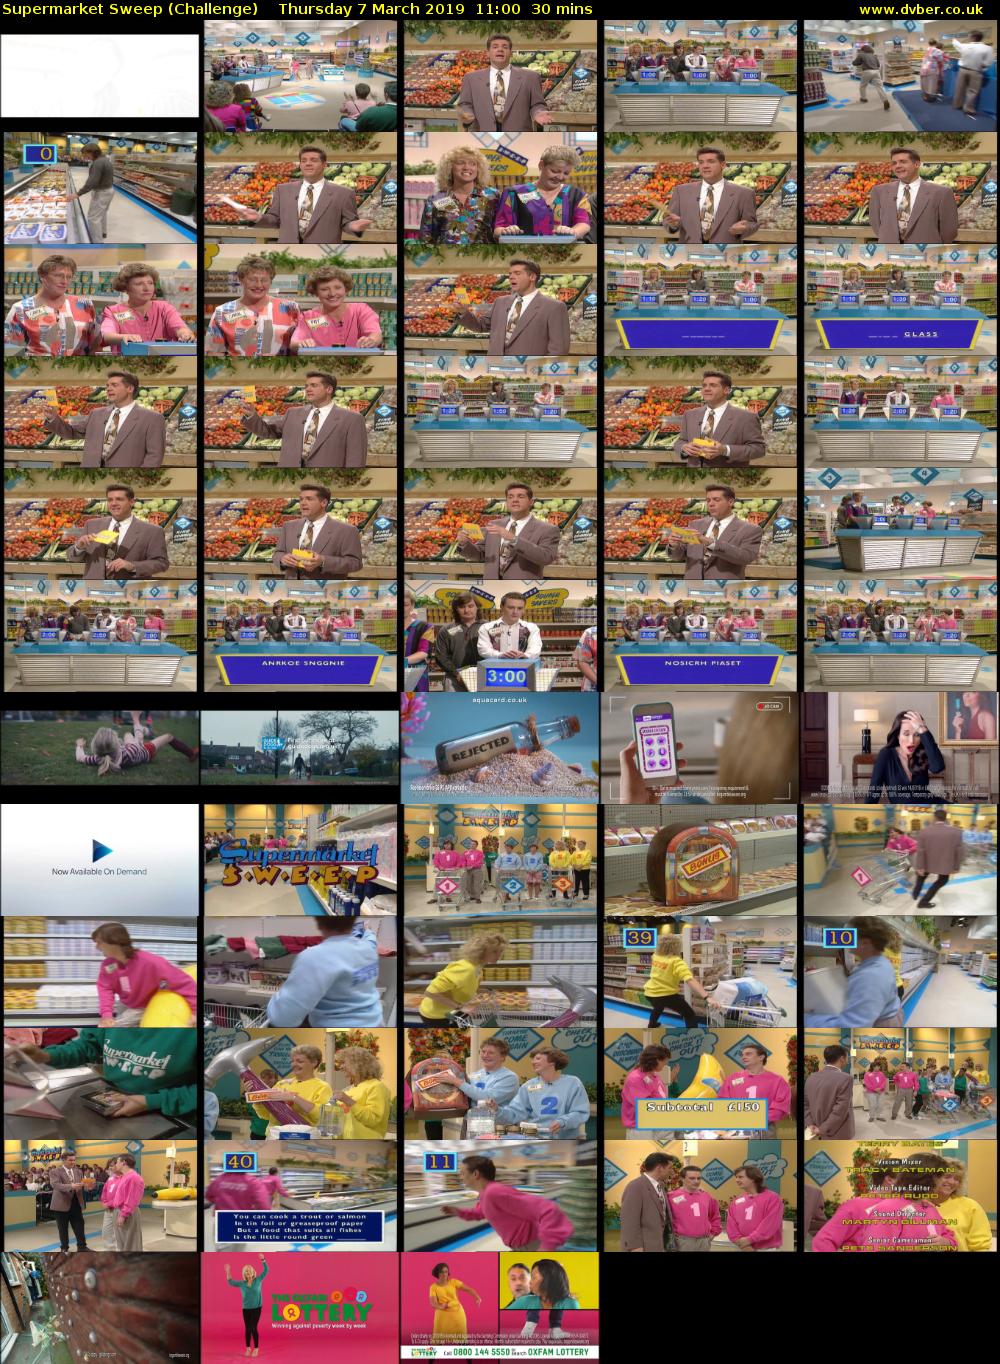 Supermarket Sweep (Challenge) Thursday 7 March 2019 11:00 - 11:30